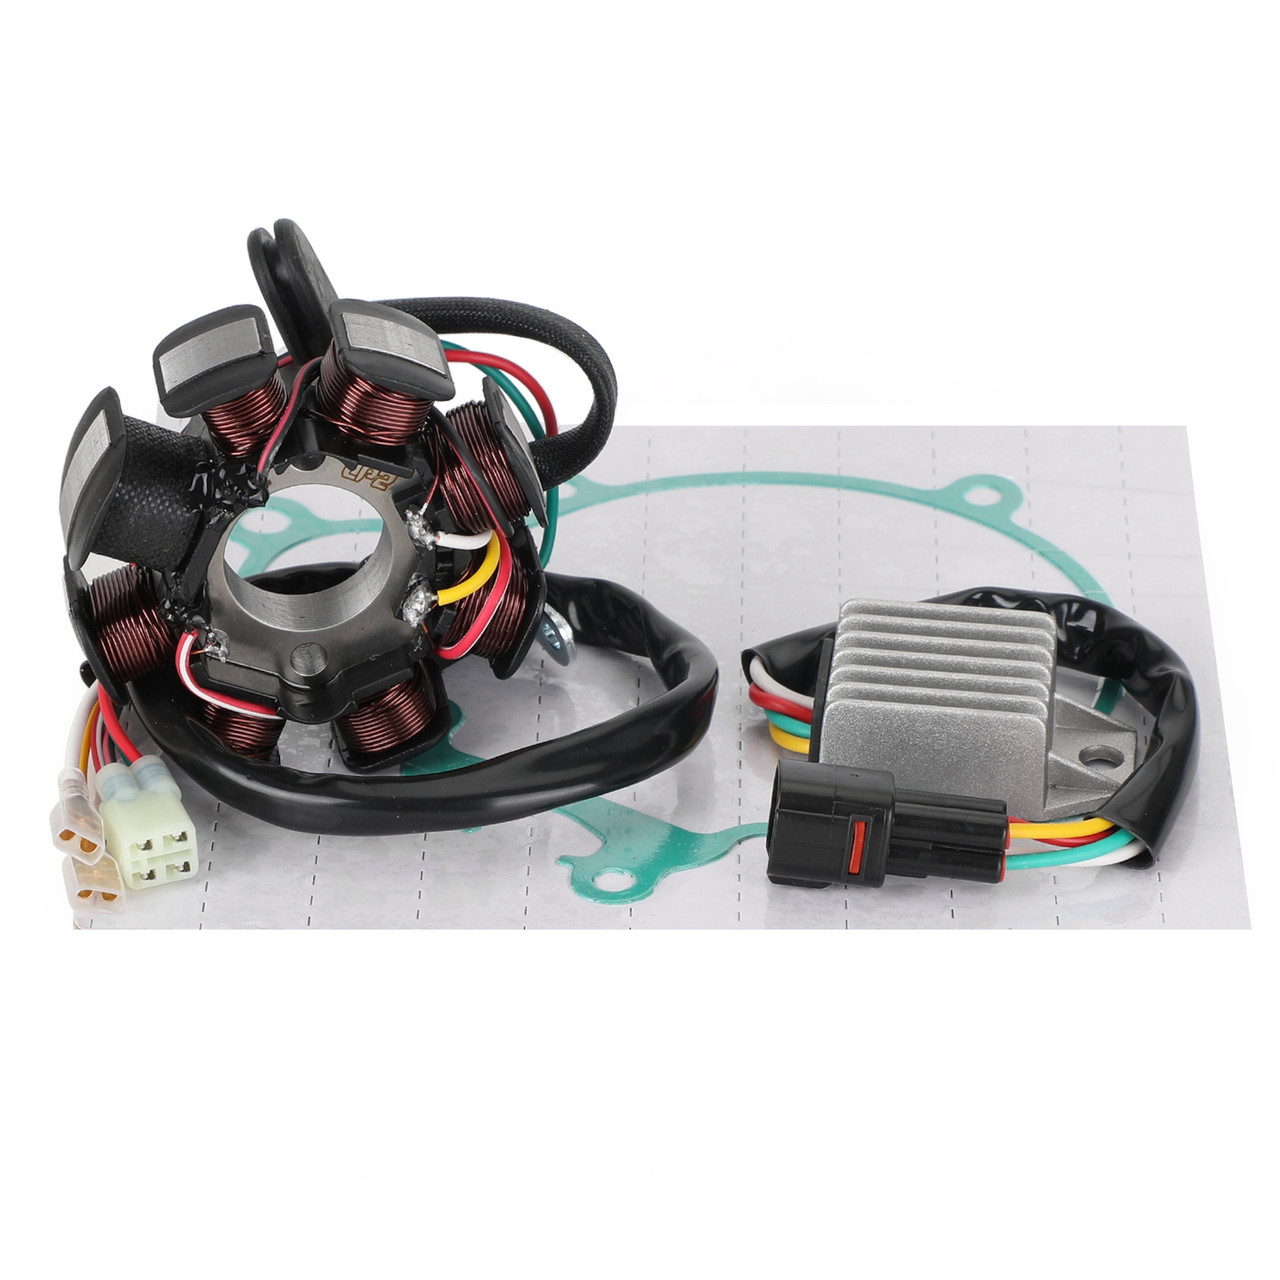 Magneto Coil Stator + Voltage Regulator + Gasket Assy Fit for 250 XC 250 XC-W 09-16 300 EXC Factory Edition 2011/2015